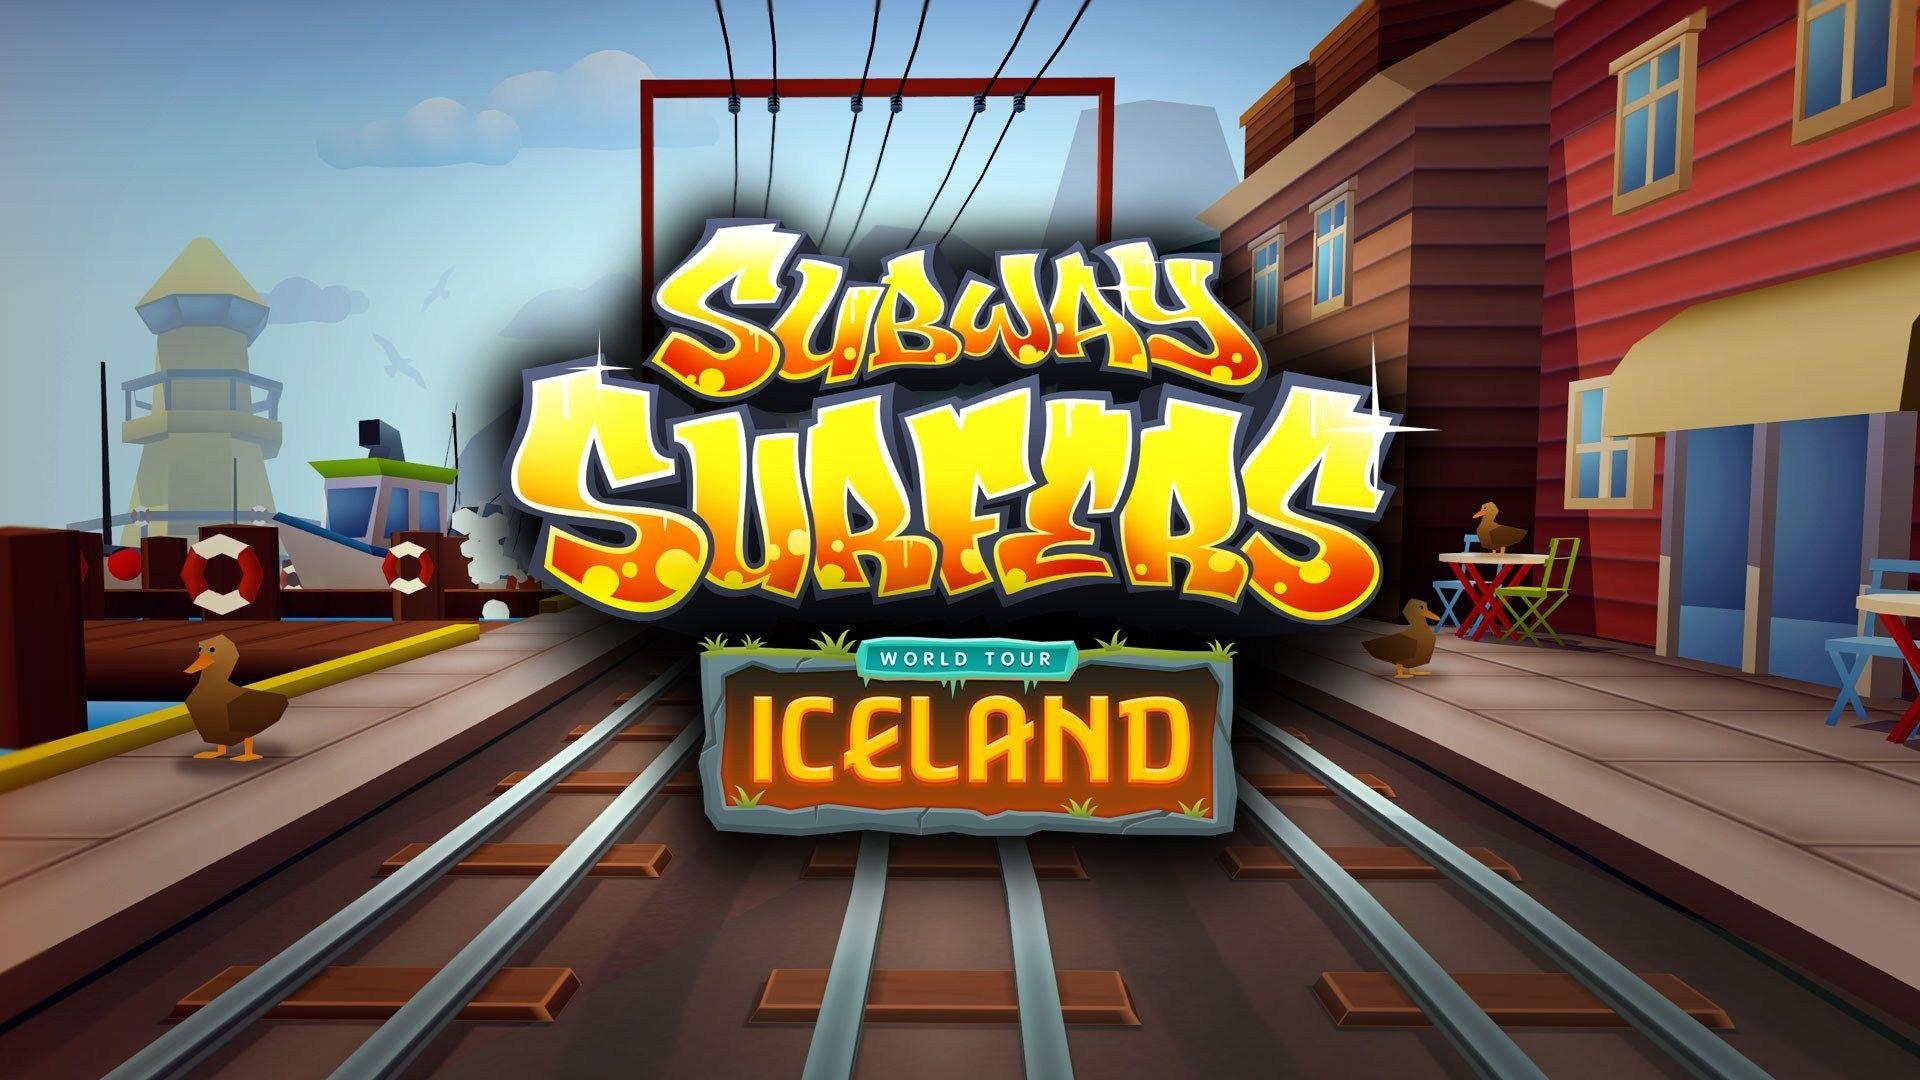 Join the Subway Surfers World Tour in beautiful Iceland with